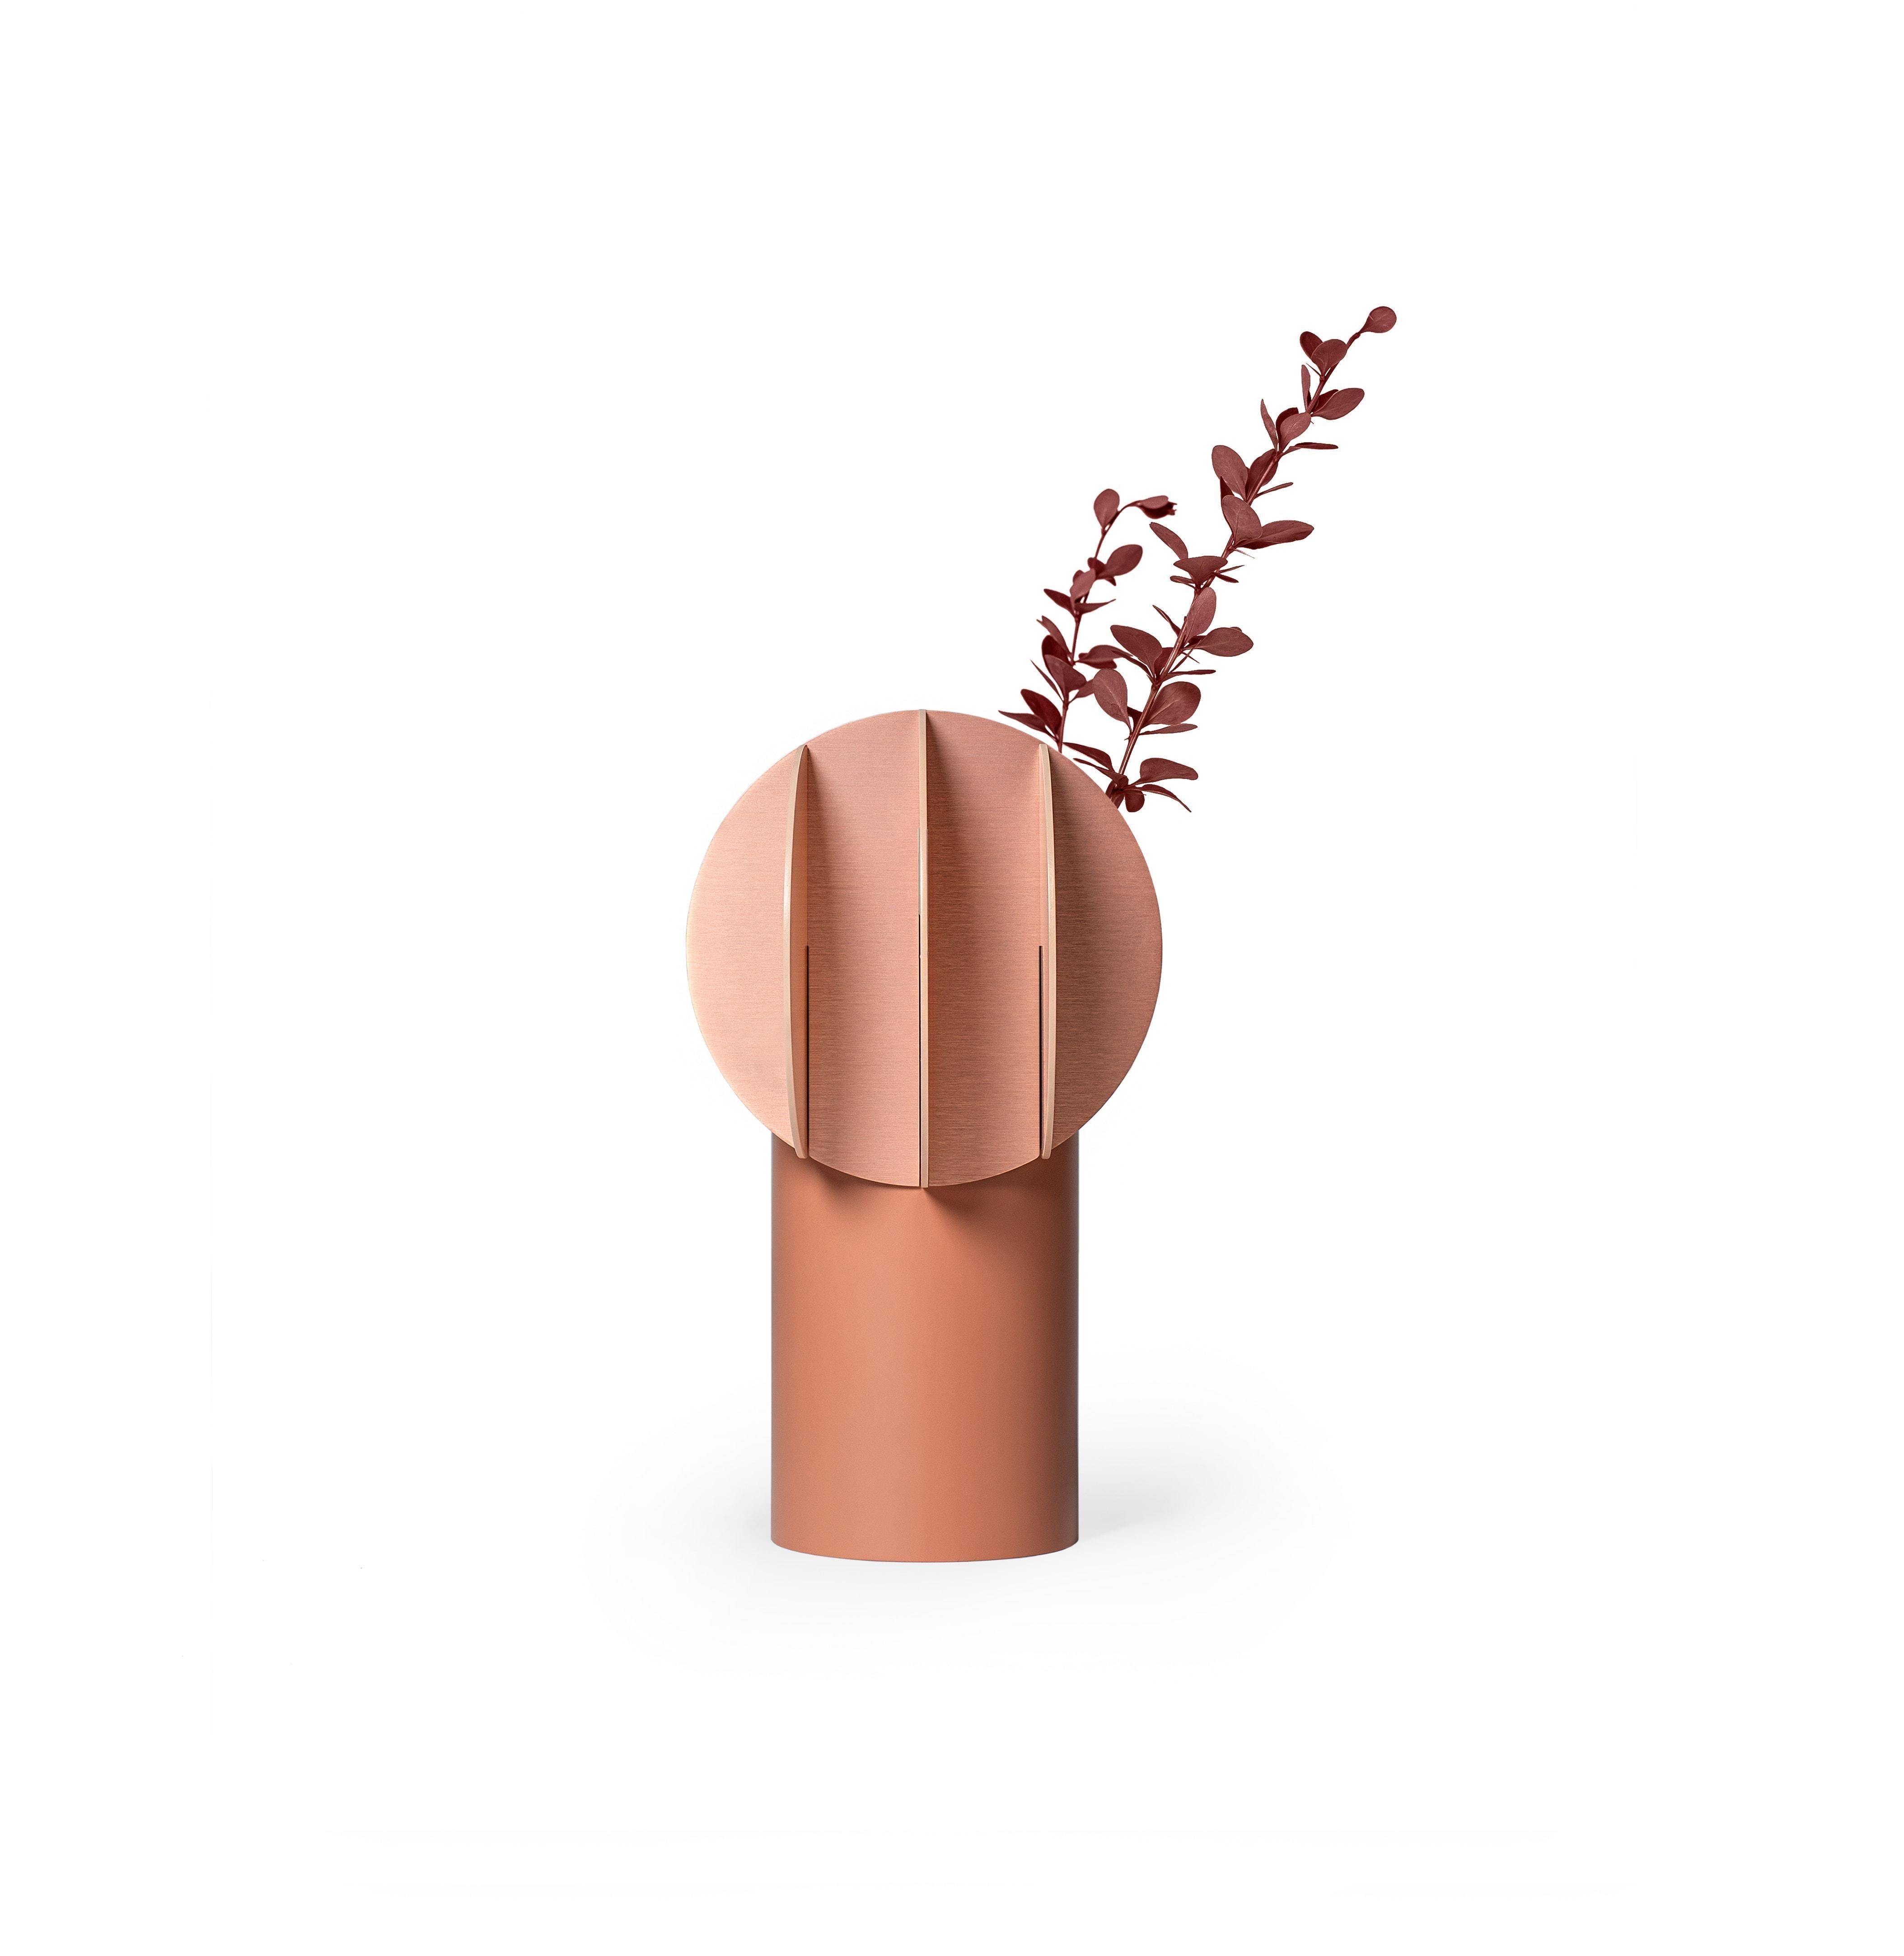 Organic Modern Contemporary Vase 'Delaunay CS7' by Noom, Copper and Steel For Sale